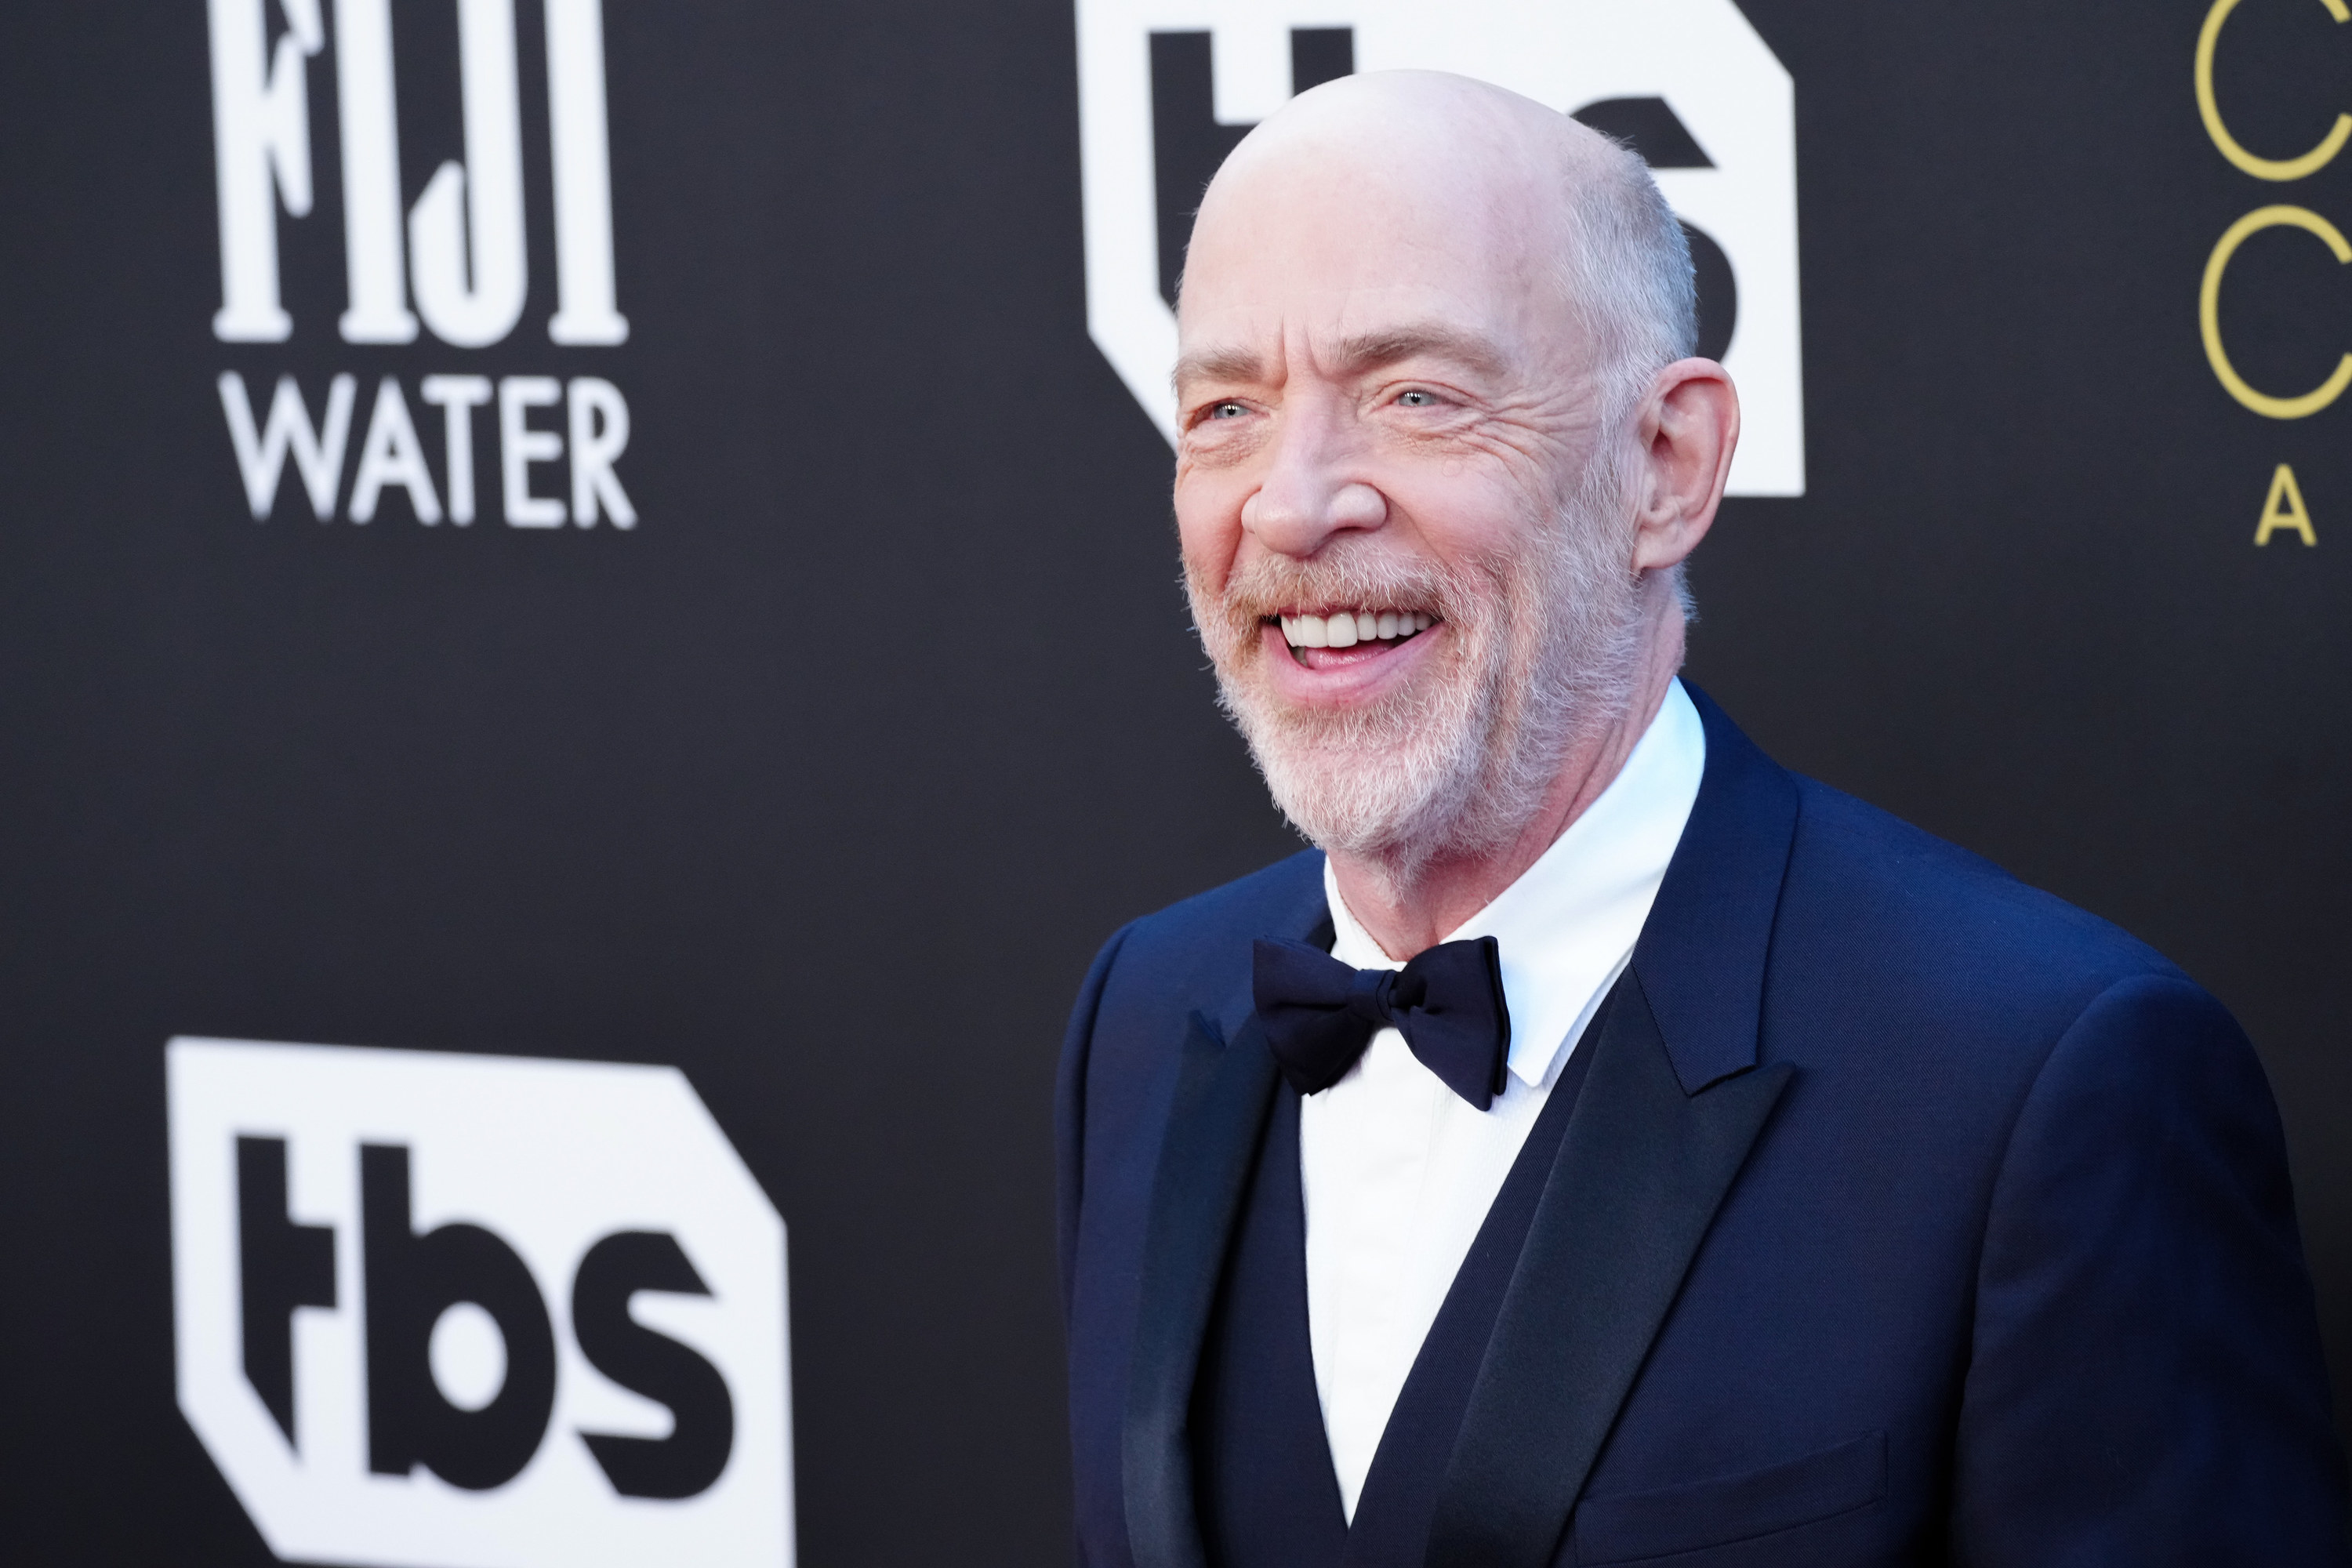 J.K. Simmons wearing a tuxedo and smiling at something off camera